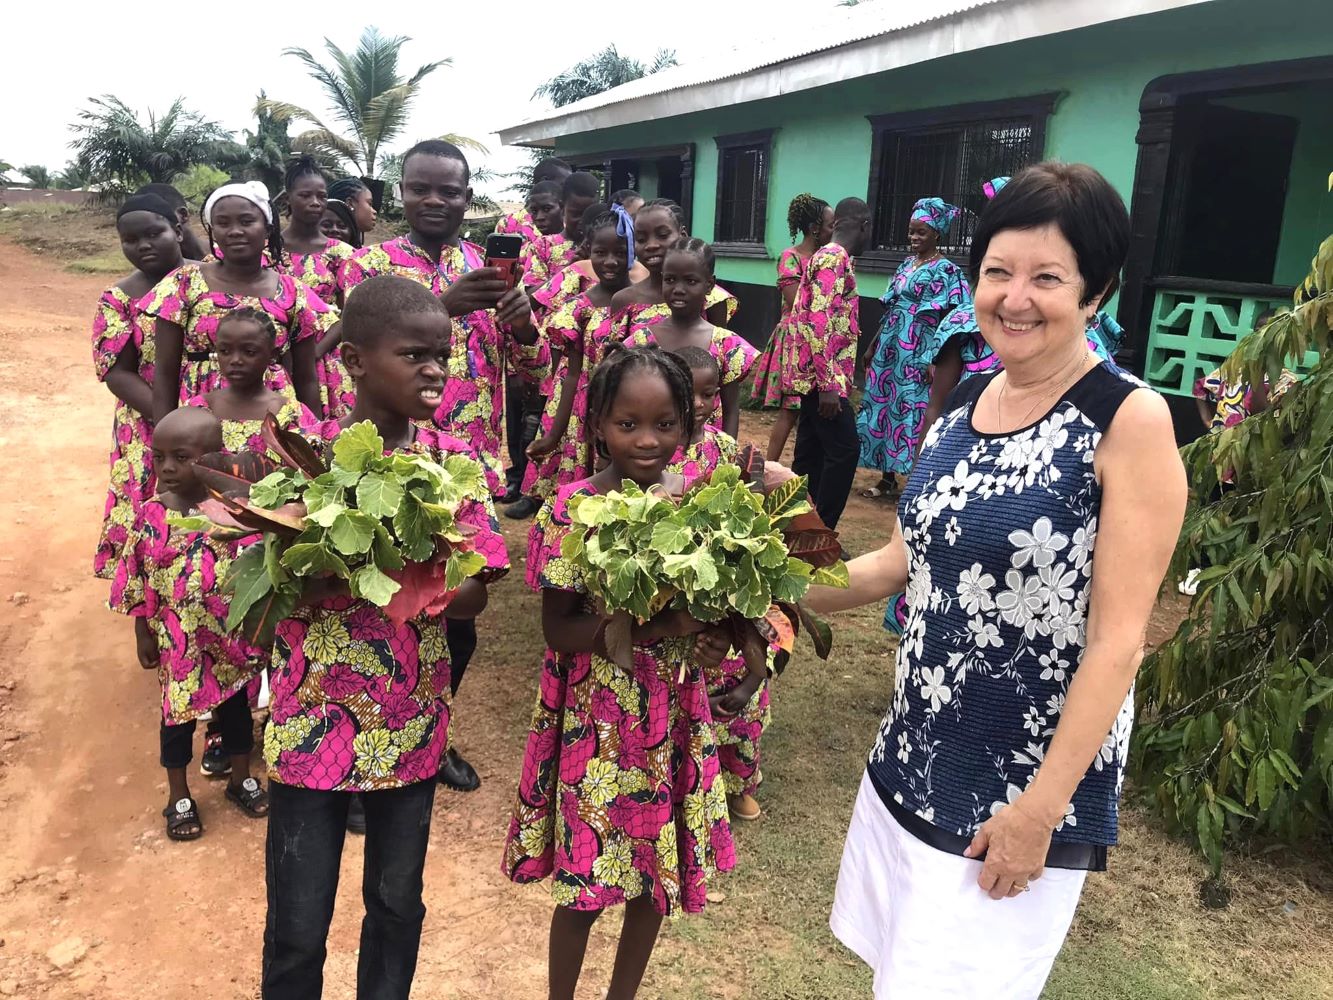 Look at the flowers they brought for us! They came to meet us singing welcome songs!! My heart just melted! They led us inside where they had a big program for us! More beautiful songs, verses and speeches of gratitude!